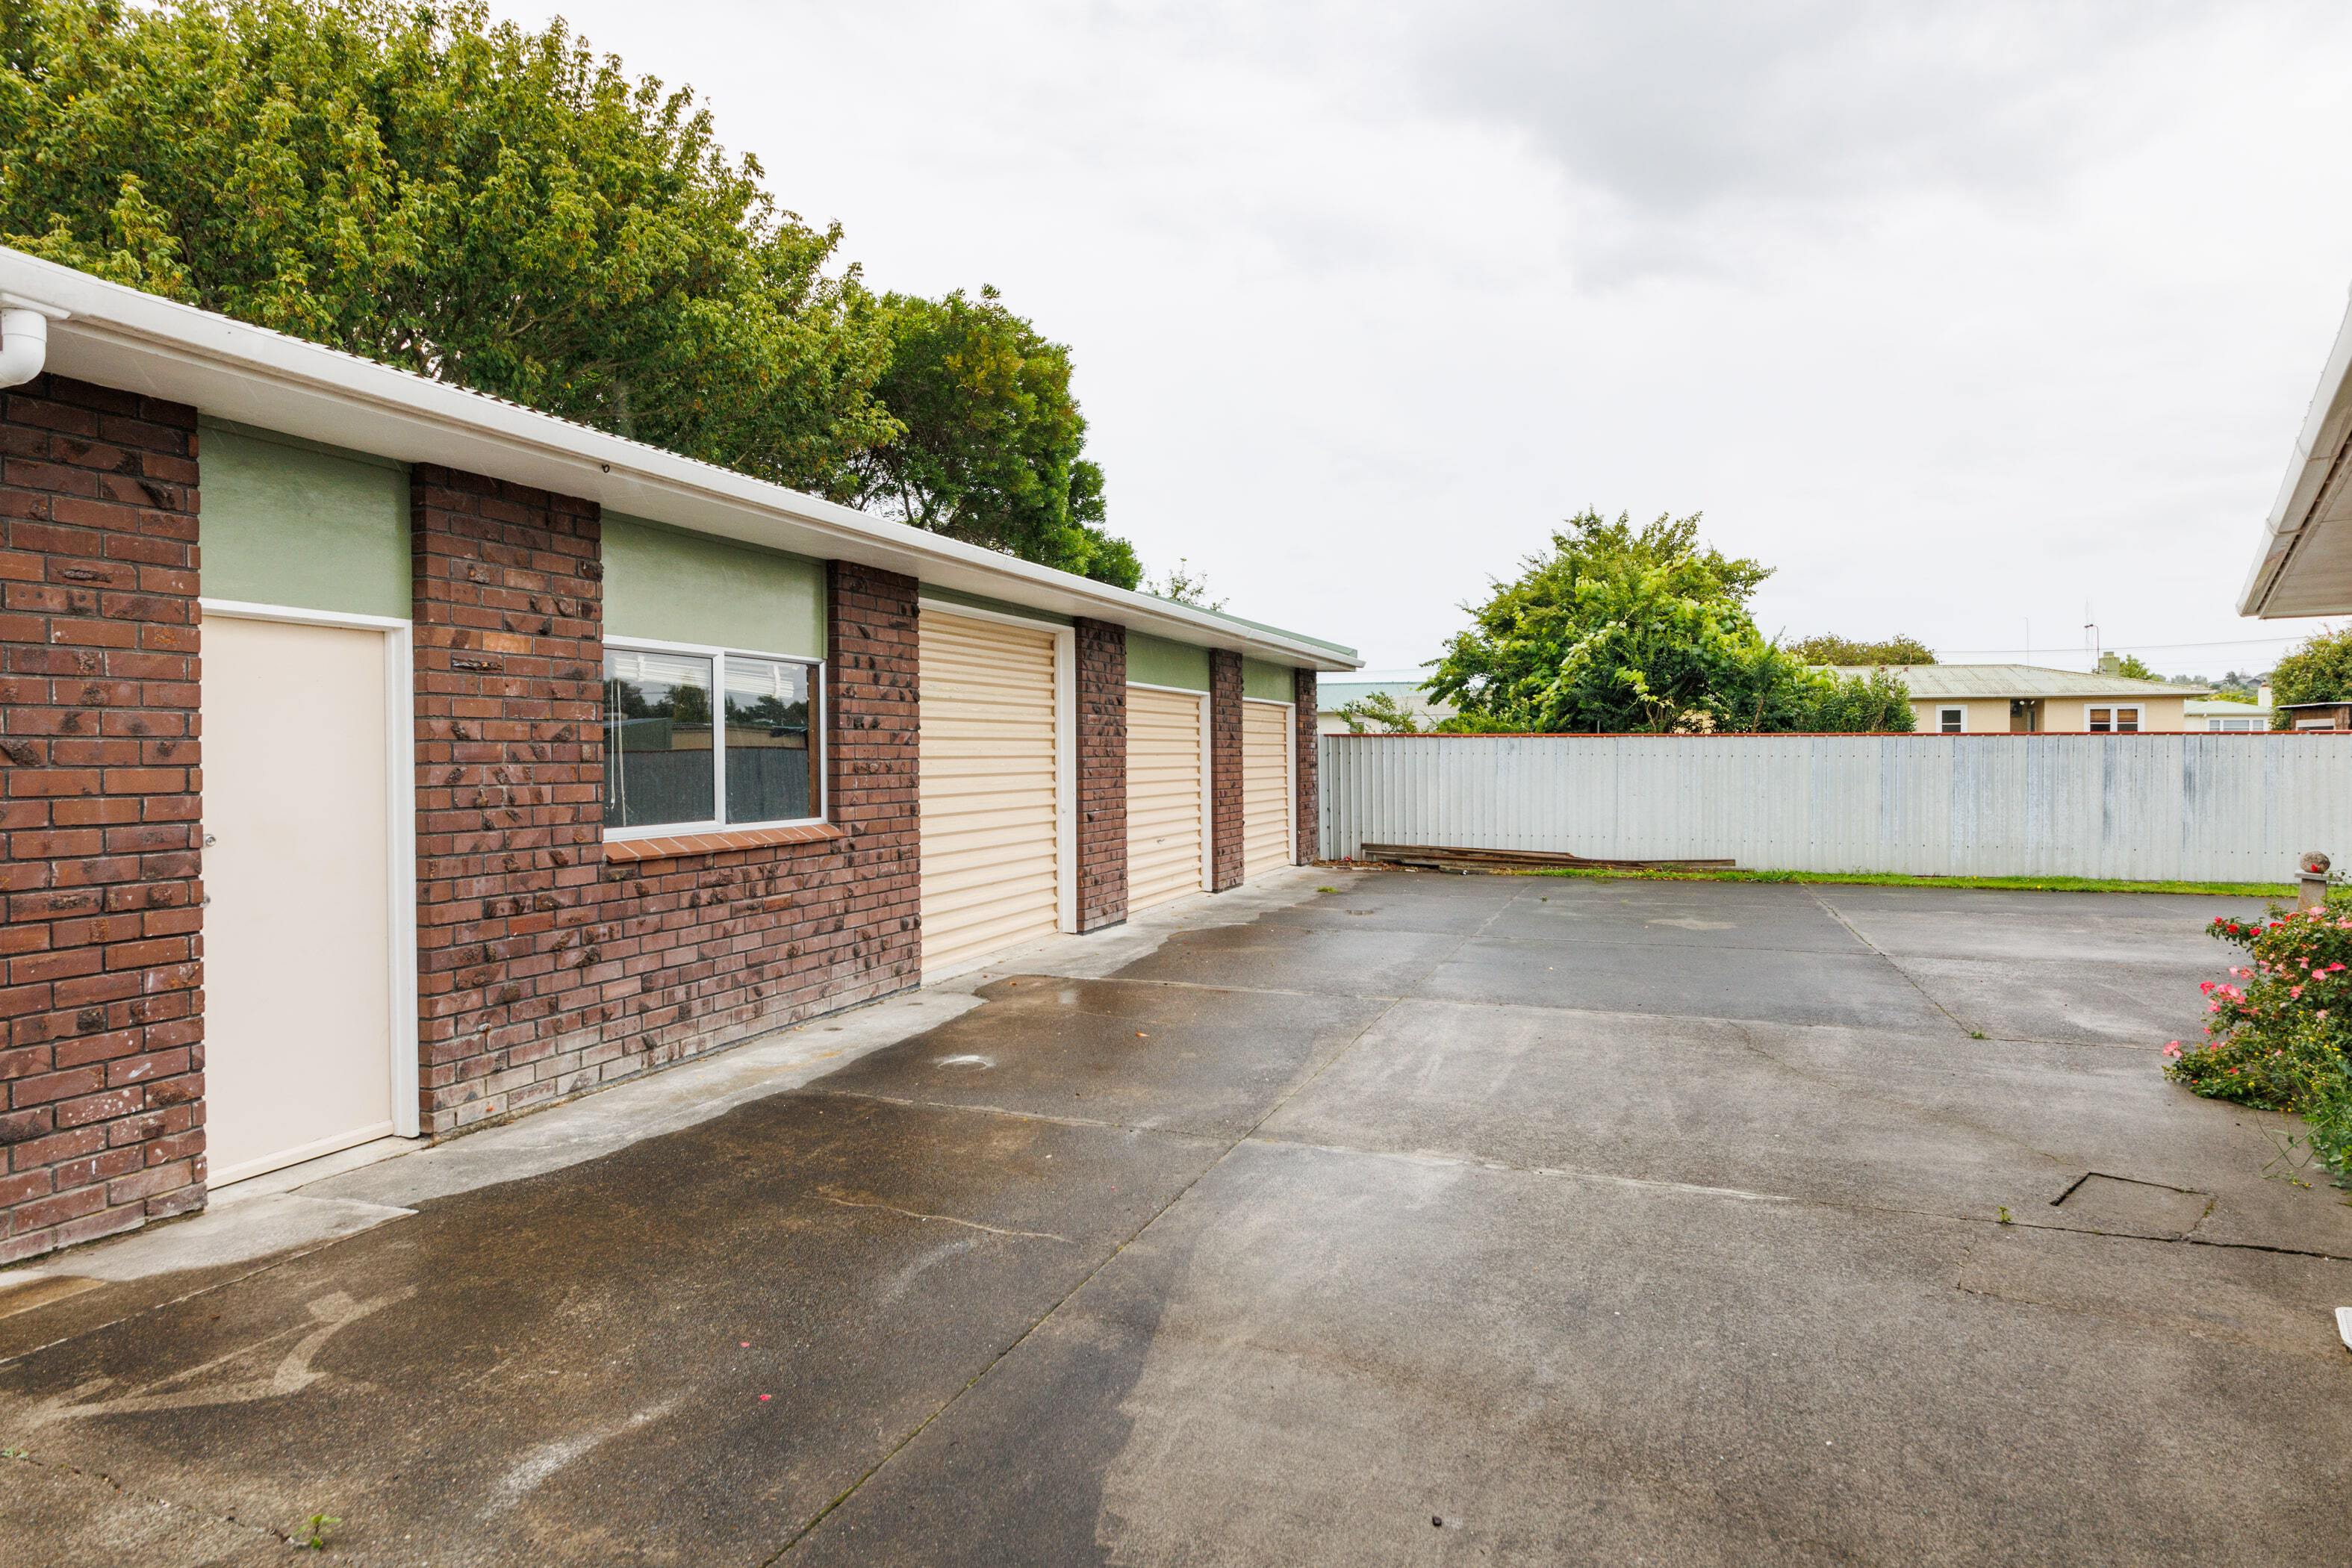 Property Picture: Discover the potential in Feilding! Triple garage